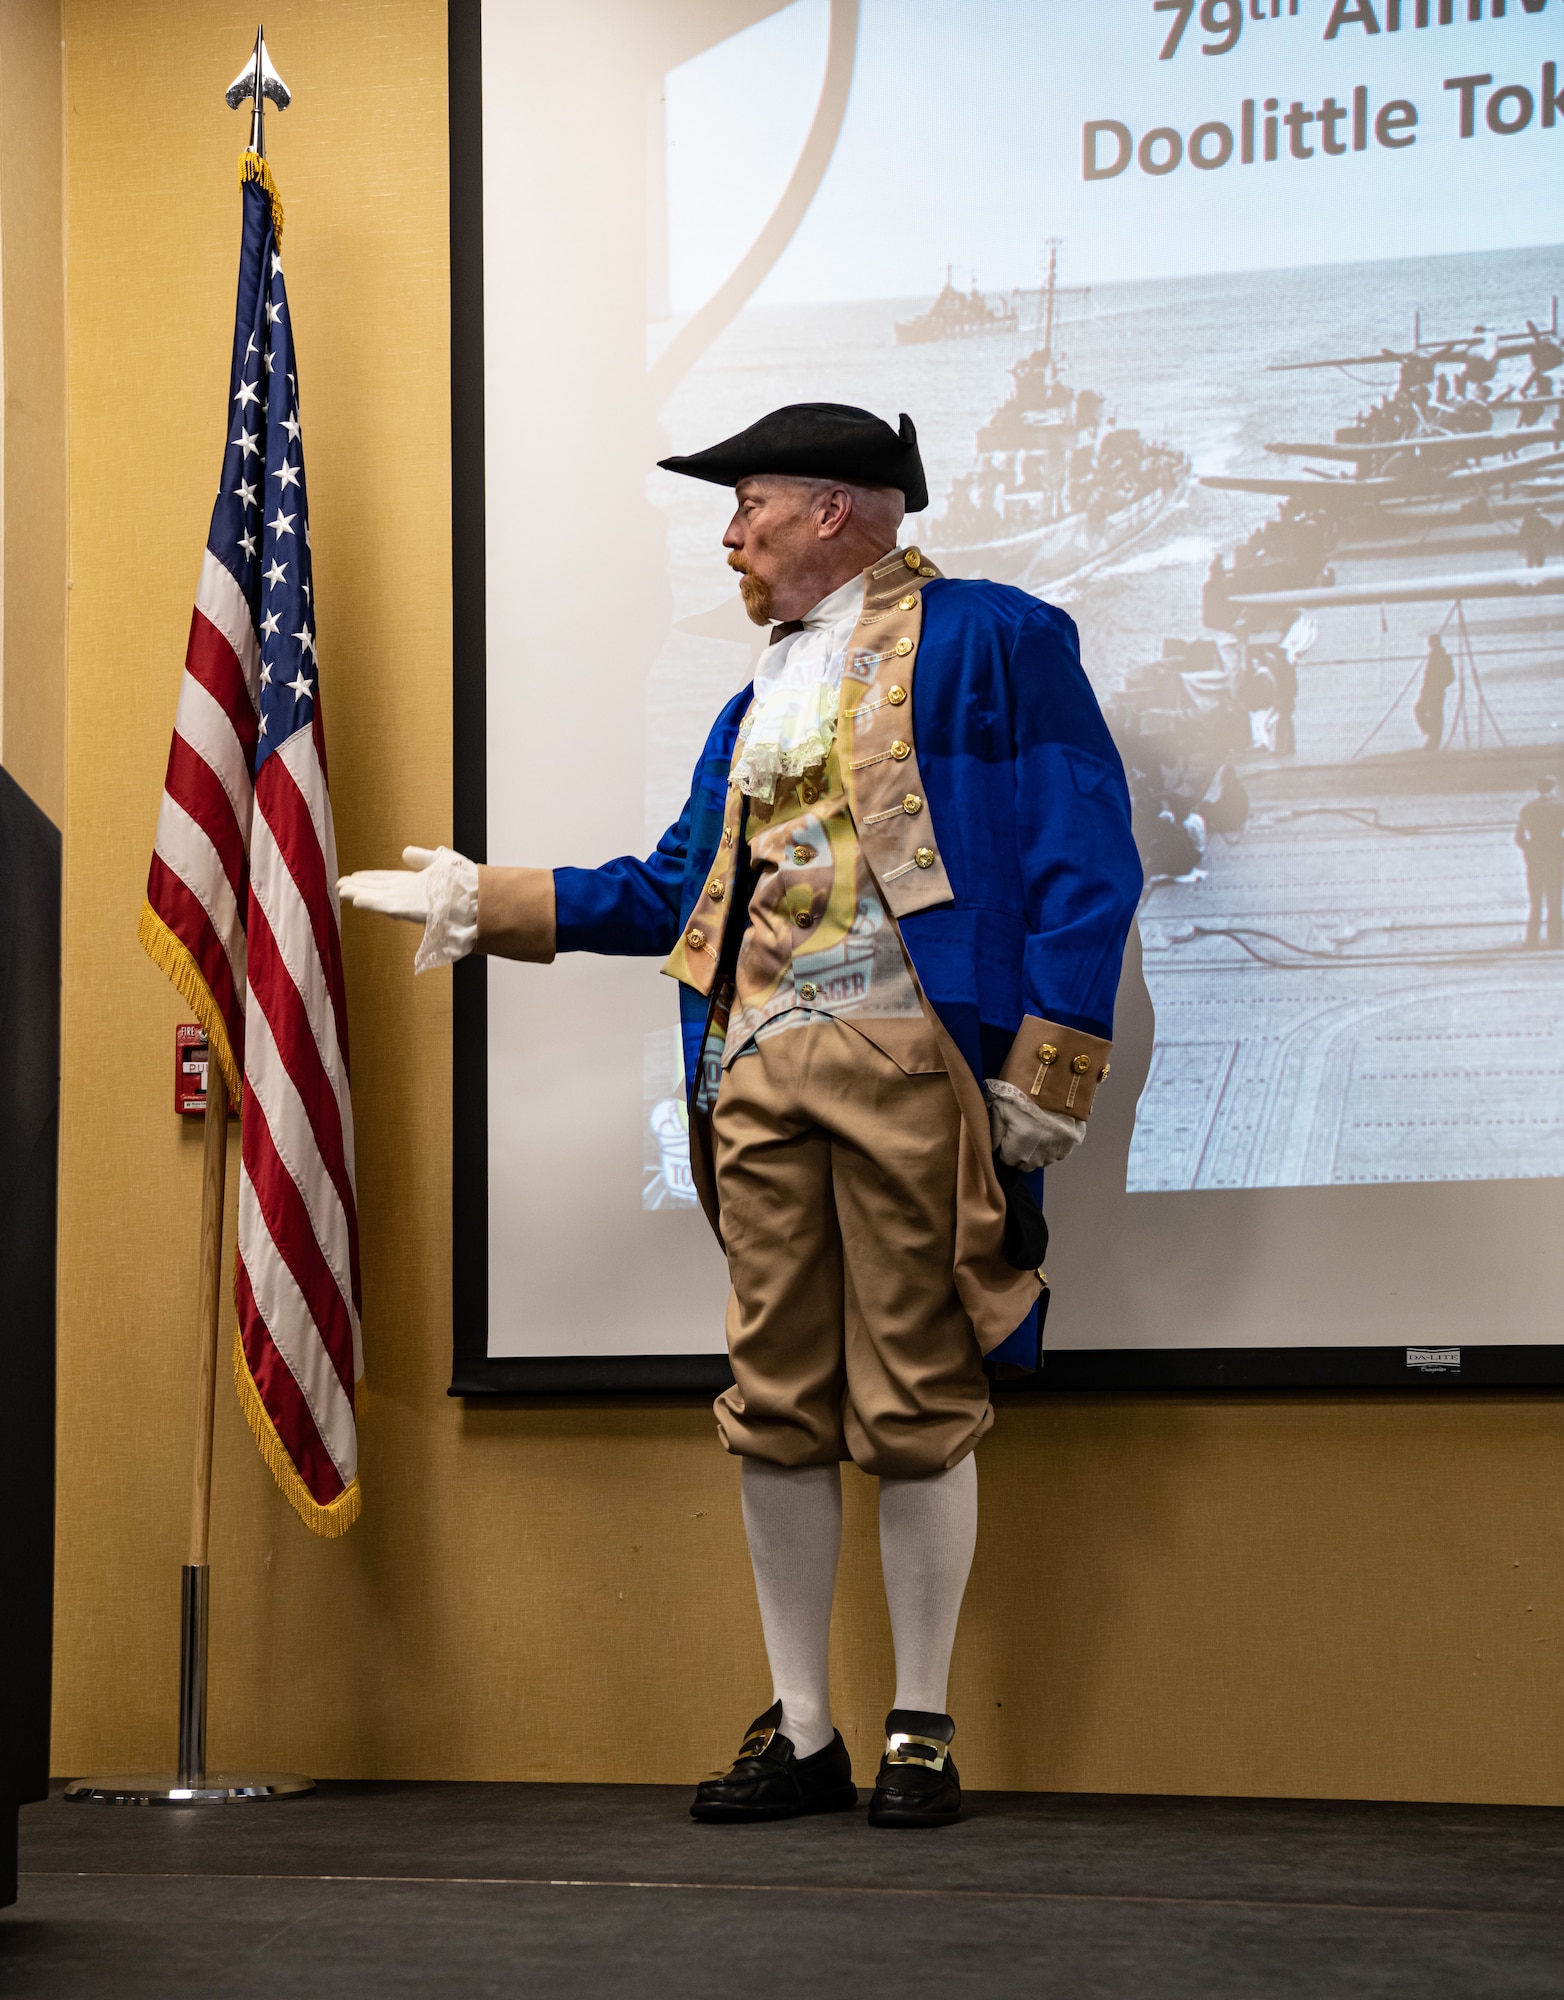 Jeffery VanCuren, the National Sojourners Black Hills Chapter secretary, recites a speech of endearment toward the U.S. flag during a 79th Doolittle Raid anniversary event at Ellsworth Air Force Base, S.D., April 16, 2021.  The Doolittle Raid was conducted 133 days after the bombing of Pearl Harbor in December 1941. (U.S. Air Force photo by Airman Jonah Fronk)